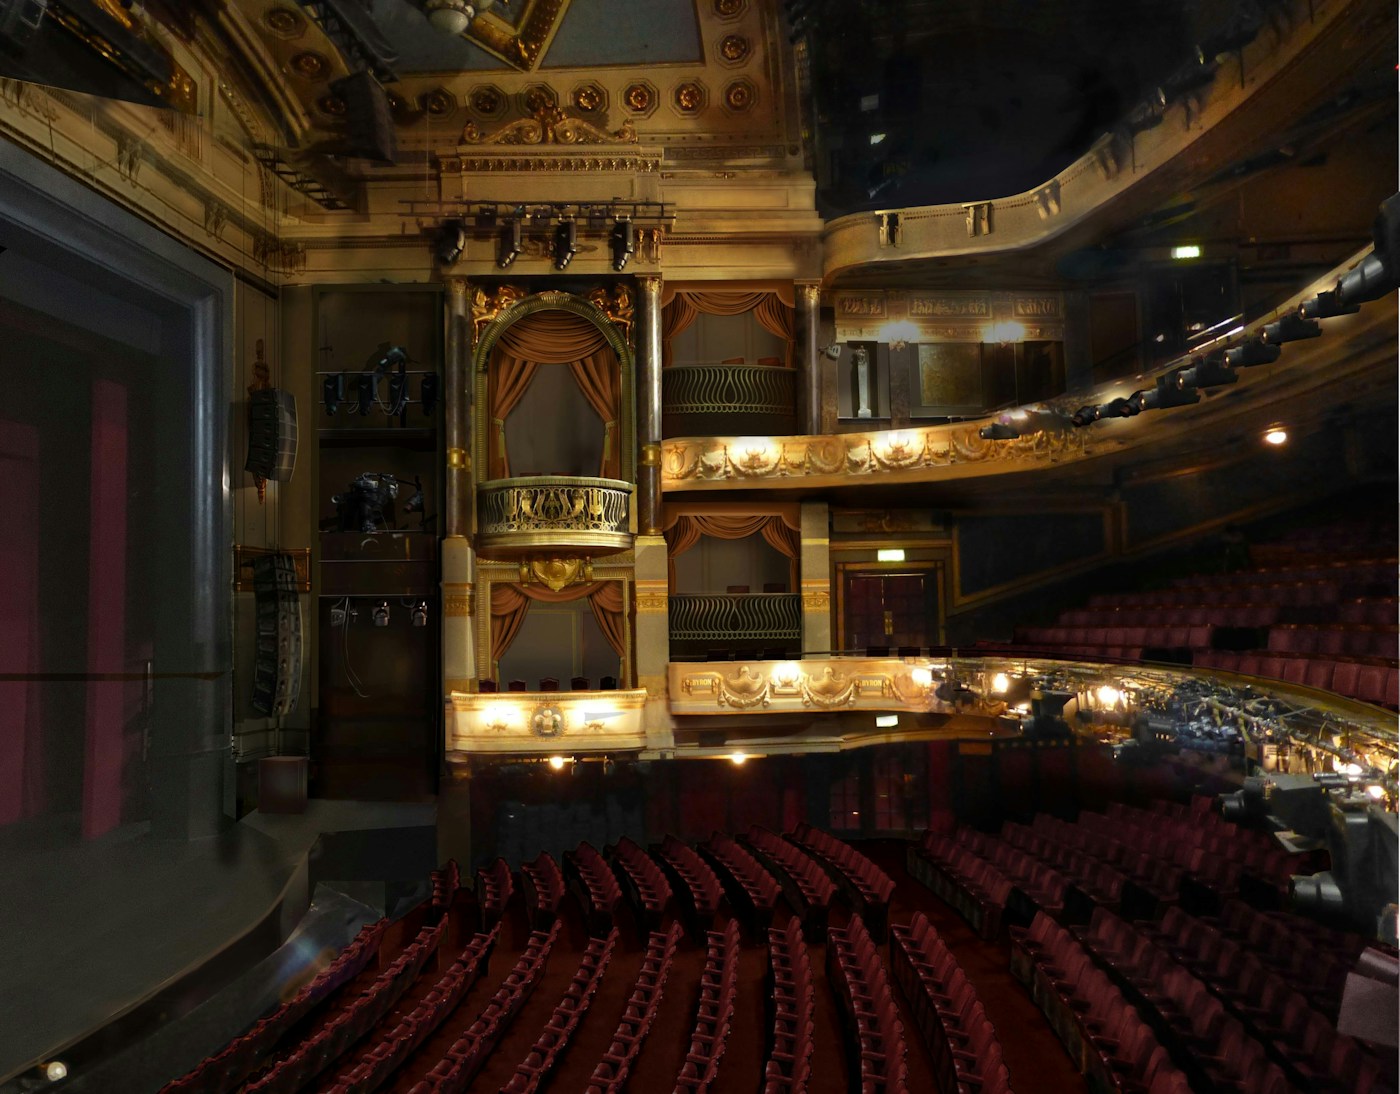 The Theatre Royal Drury Lane - Main Entrance situated on 